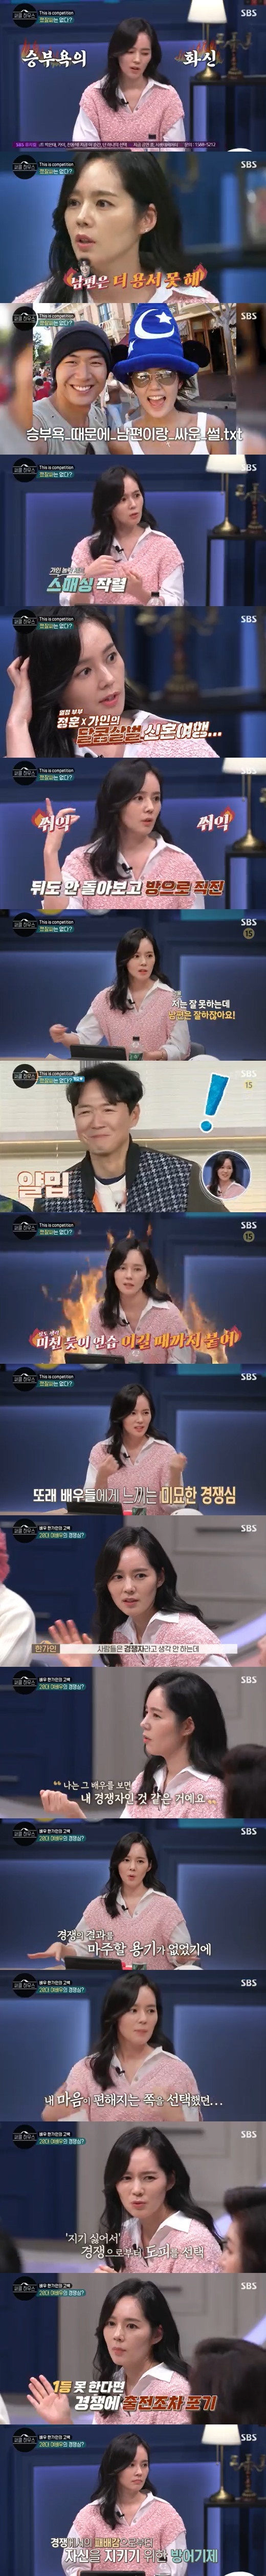 In circle house, actor Han Ga-in revealed why he decided to marry at a rather early age of 23.In SBS circle house broadcasted on the afternoon of the 10th, MCs were shown to talk about Infinite Competition Society.I just hate the word lost, Han Ga-in said on the day, I have a lot of fighting spirit, so I avoid the game itself. I hate to bet.So I can never play golf like this. I am so stressed when I lose, I only exercise alone without record. Han Ga-in then told the honeymoon anecdote, saying, Its no more forgiving to lose to my husband (Yeon Jung-hoon).I went to Cancun on my honeymoon, but it is a very hot place. I did not have anything to do, so I had a table tennis table on the first floor of the hotel.I do not play well, but my husband keeps pushing me away, making me bring the ball from a distance in the hot, and laughing.I was angry that the lid was open later, even though it was a honeymoon, and I laughed, Stop laughing now. Even though my husband continued to laugh, I put down the table tennis and went up to the room. I do not play a lot of games when Im newly married. Im not good at ironing, but my husband is good.So I practiced crazy alone at dawn and woke up in the morning and put on a game with my husband again. Until I win. In particular, Han Ga-in said, If you are at the same age as me, there are actors who come in similar roles.When I was a kid, I felt like I was a competitor to the actors. No one else thinks they are competitors.So I hate this competition so much that I can not accept it flexibly and break it, so I just wanted to not participate in this UEFA Champions League.I didnt play, so I just got out and got married quickly because I thought, Im not going to put it on the list.I have to get out of the UEFA Champions League, I do not want to compete there, I do not want to show myself losing, and it was too hard for me to accept. Dr. Oh Eun Young said, Han Ga-in is a person who wants to do too well and works too hard, so if it is not 100, it seems to have not done 90 ~ 60.So I just give up playing I do not want rather than being embarrassed because I can not do it properly. I think it is better to score 0 points than 80 ~ 70 points.This is also a defense mechanism to protect yourself. 